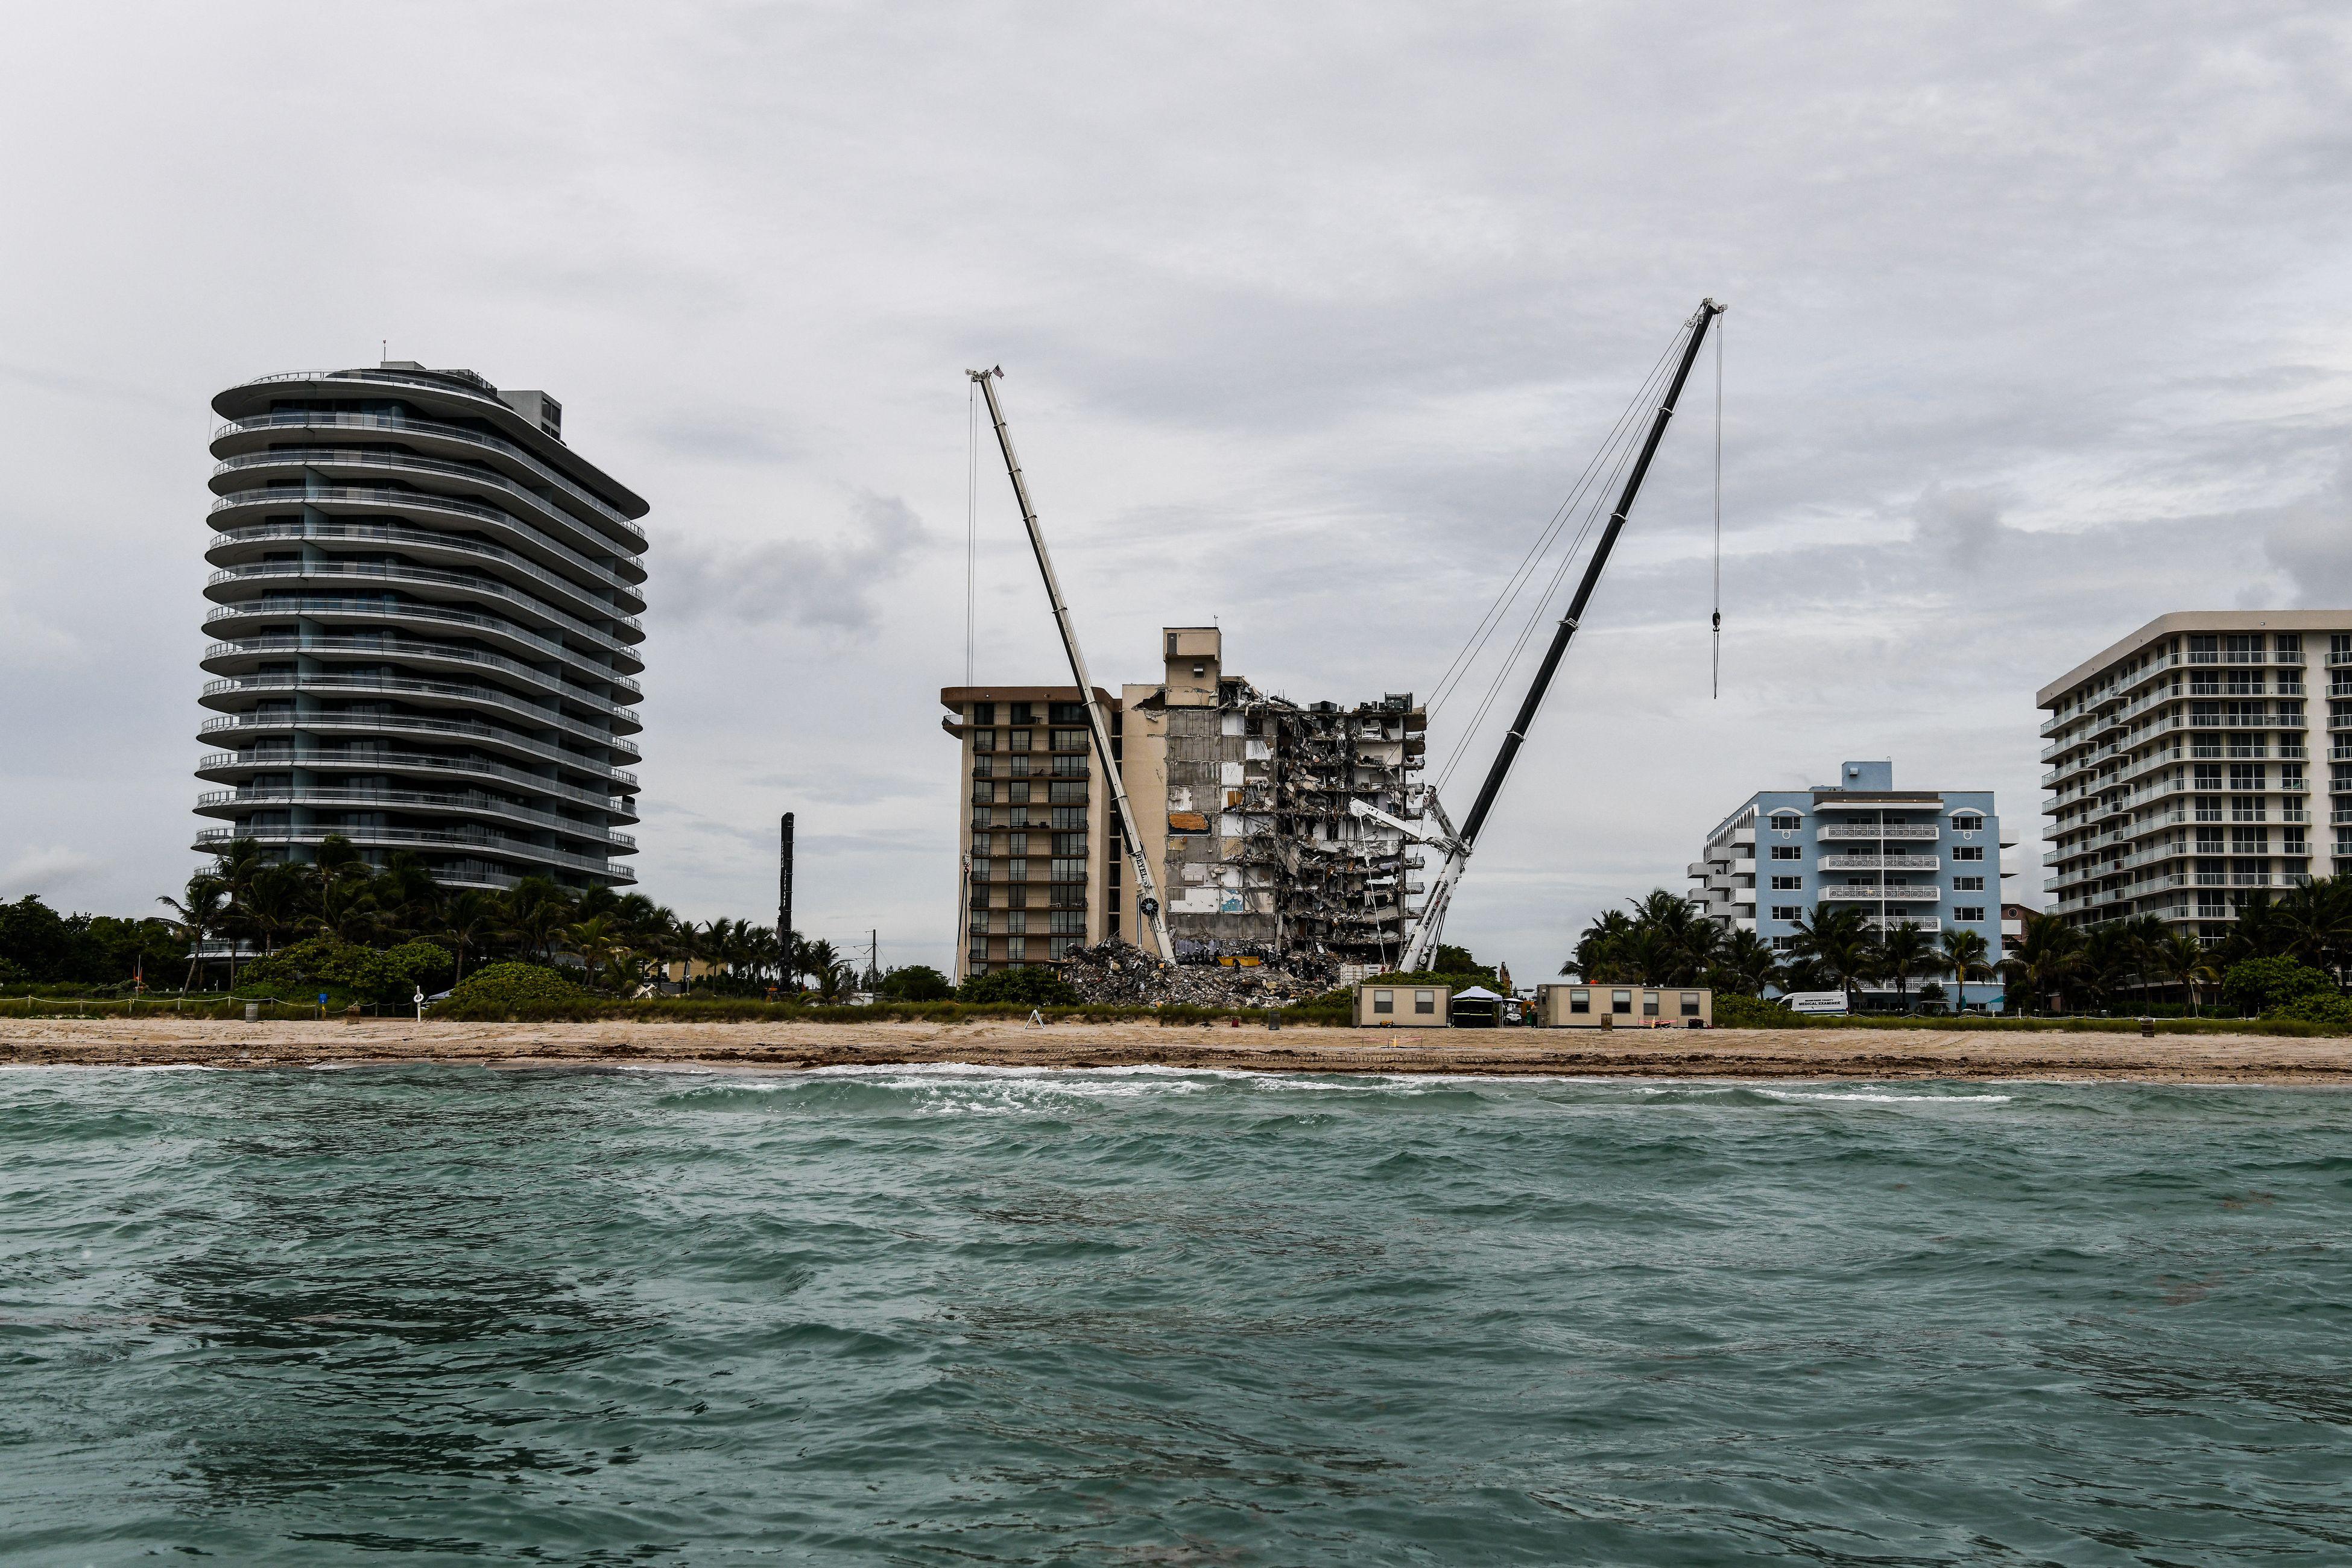 The partially collapsed Champlain Towers South condo between other condo buildings on the oceanfront seen from the water